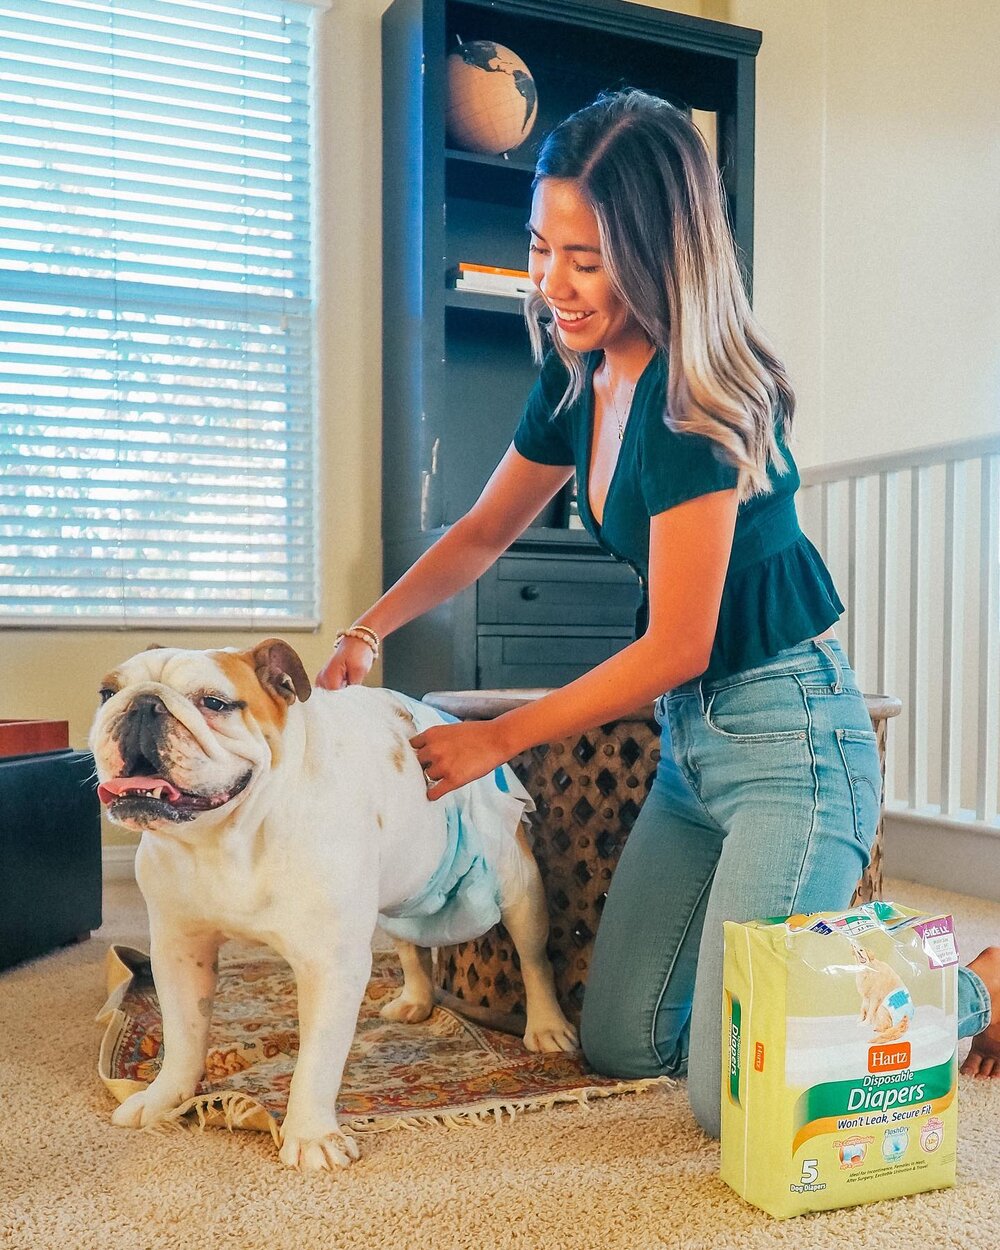 Happy dog, happy life! #ad @hartzpets Titus became notorious for marking when no one was home. It became a constant chore cleaning up his mess. My fianc&eacute; and I knew something was up because he has been housebroken for years! 

So, what do you 